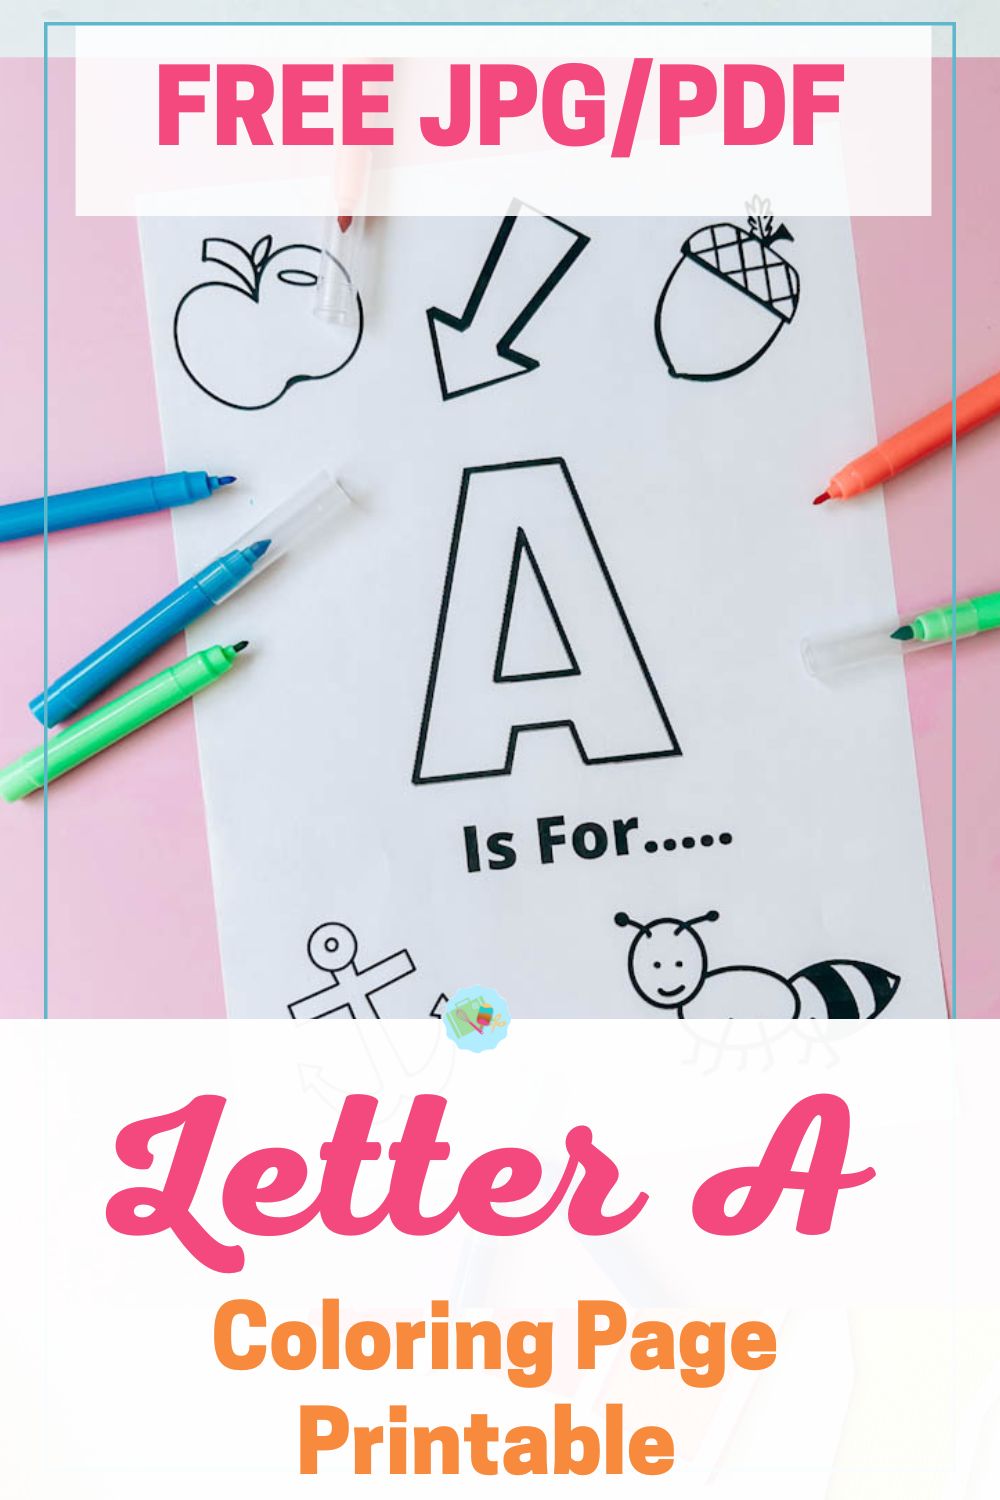 Free printable letter A Coloring page